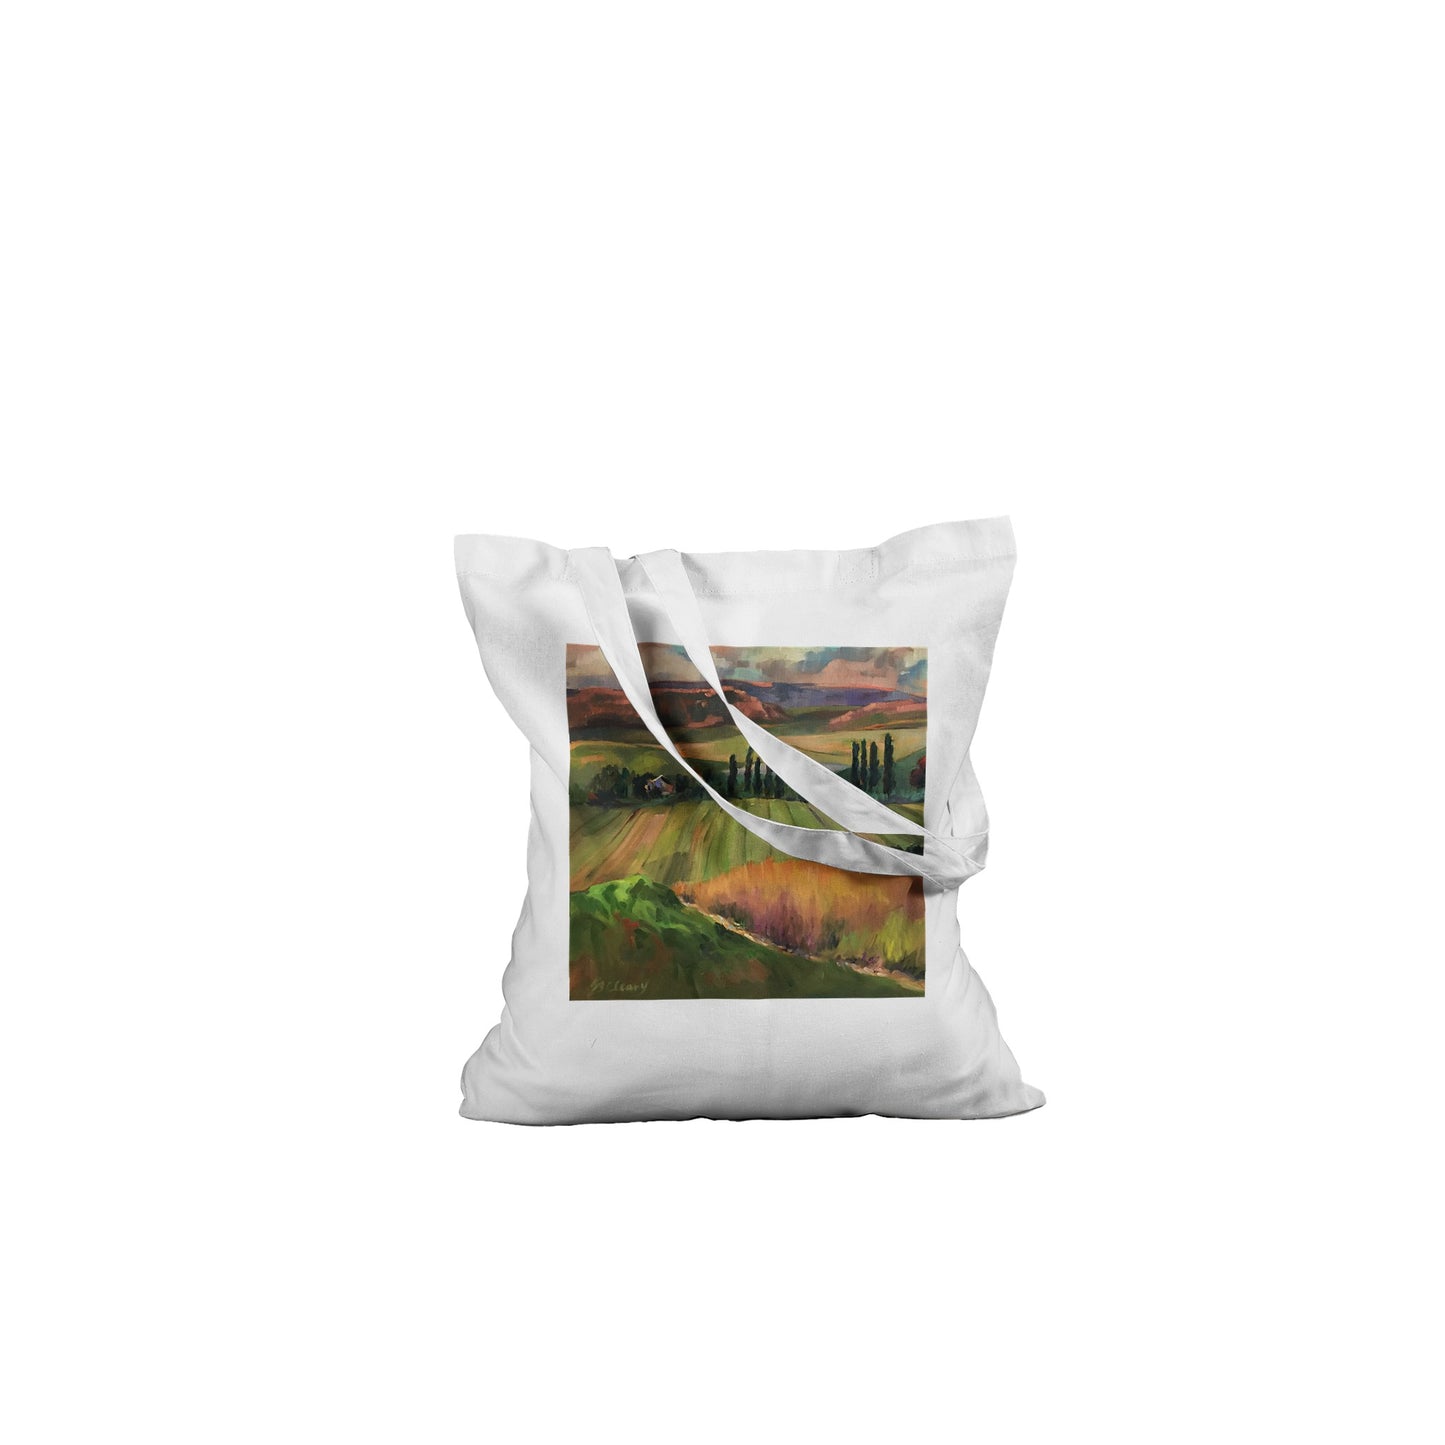 Pastoral Landscape Classic Tote Bag by Barbara Cleary Designs